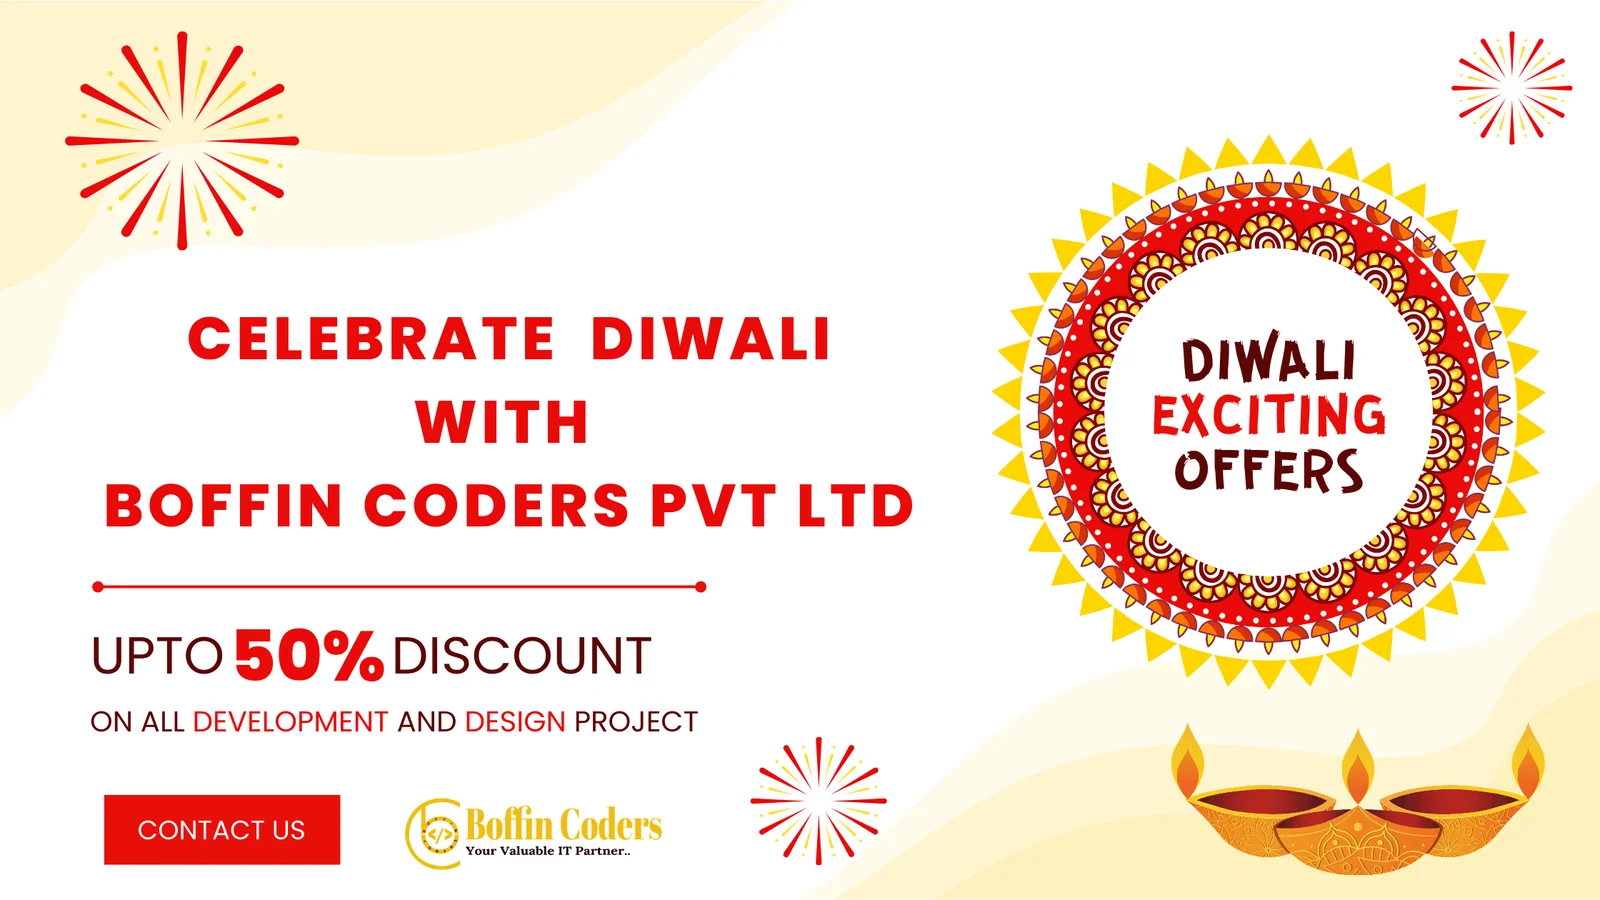 Enjoy Diwali With Boffin Coders Exciting Offers !